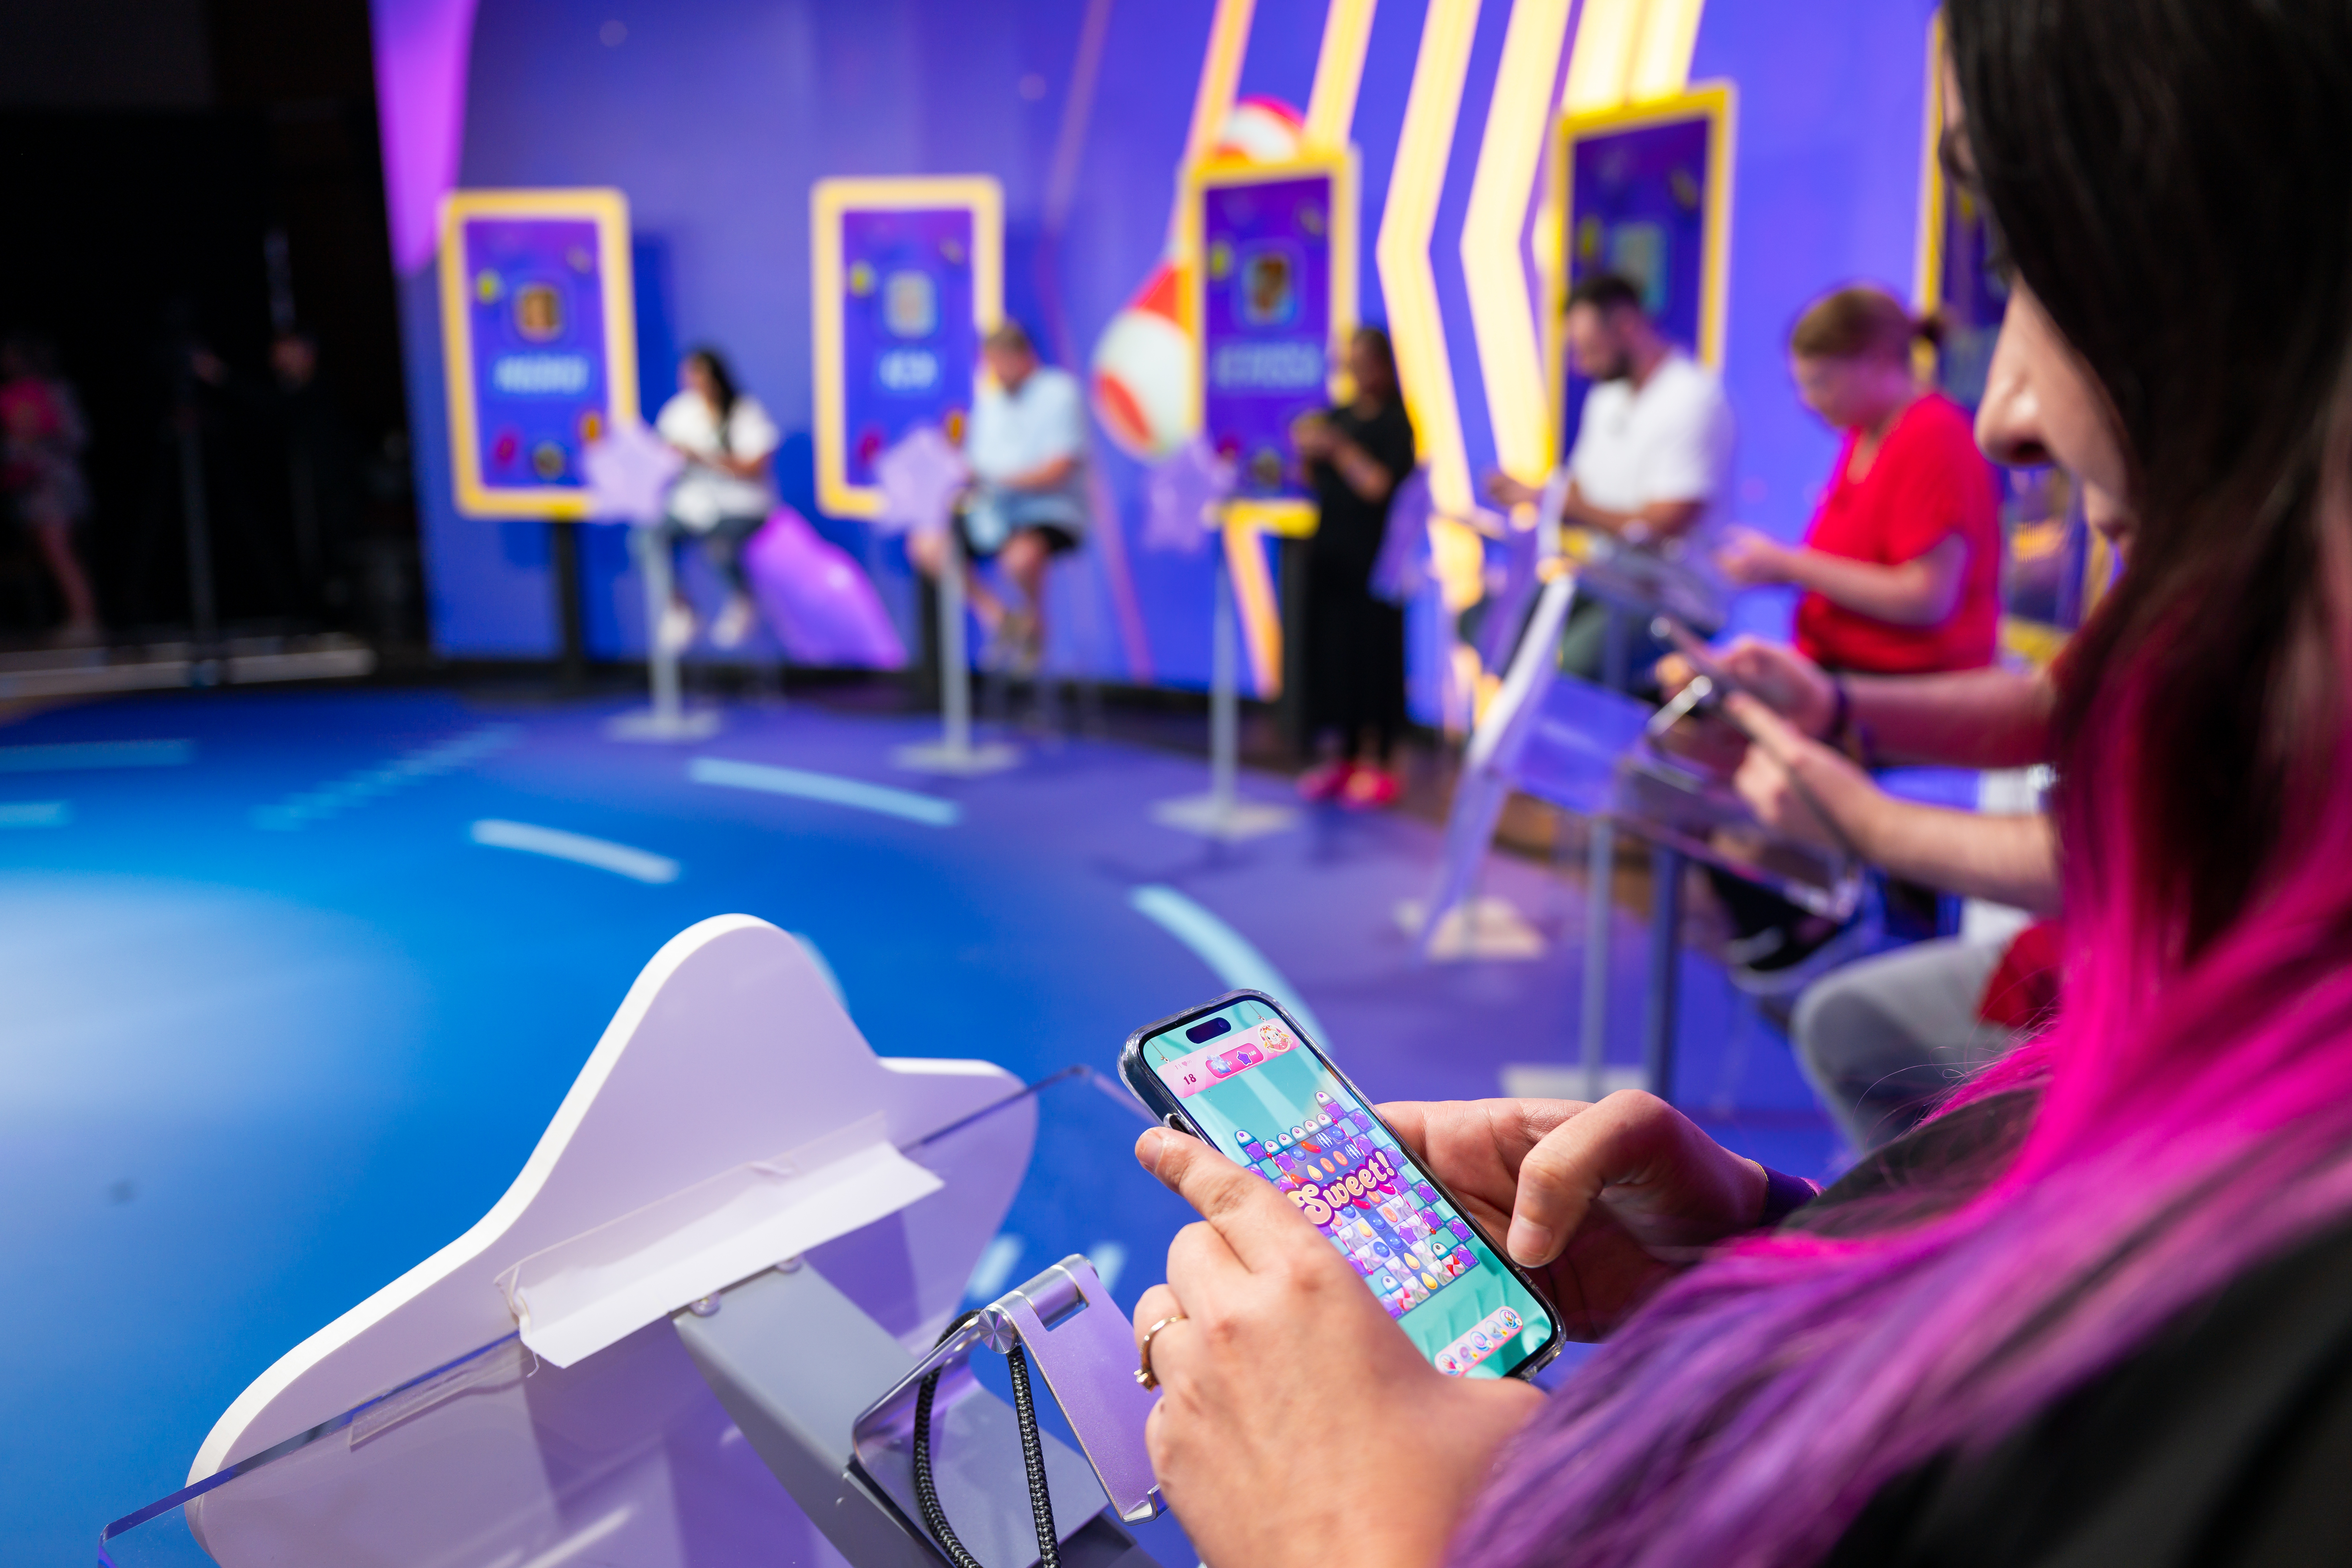 How Candy Crush All-Stars Turns a Casual Game Into an Elite-Level Tournament